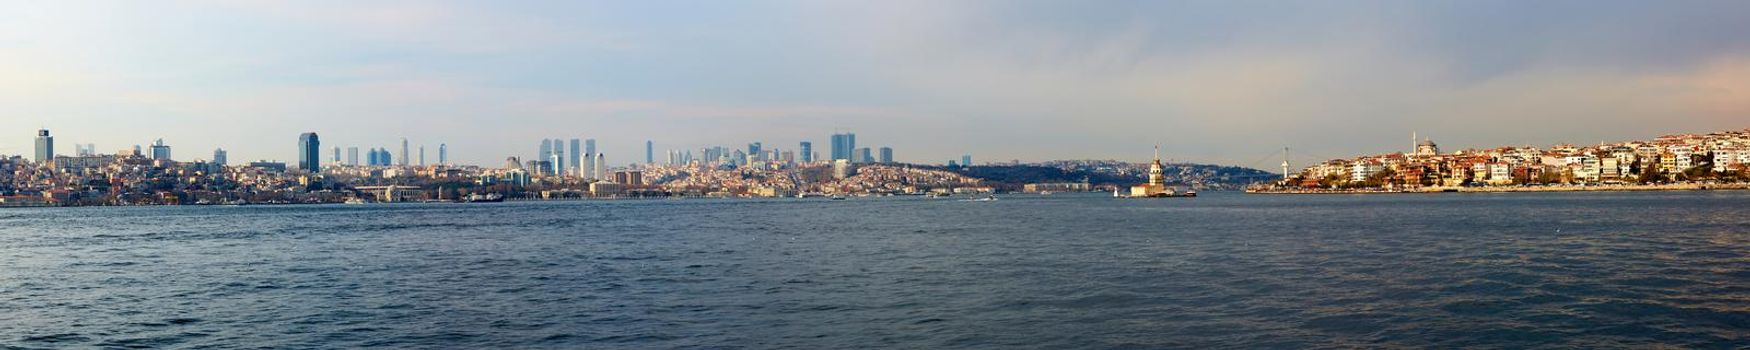 Sea view to Istanbul.Asian and Europe coasts. Ferry boat trip.